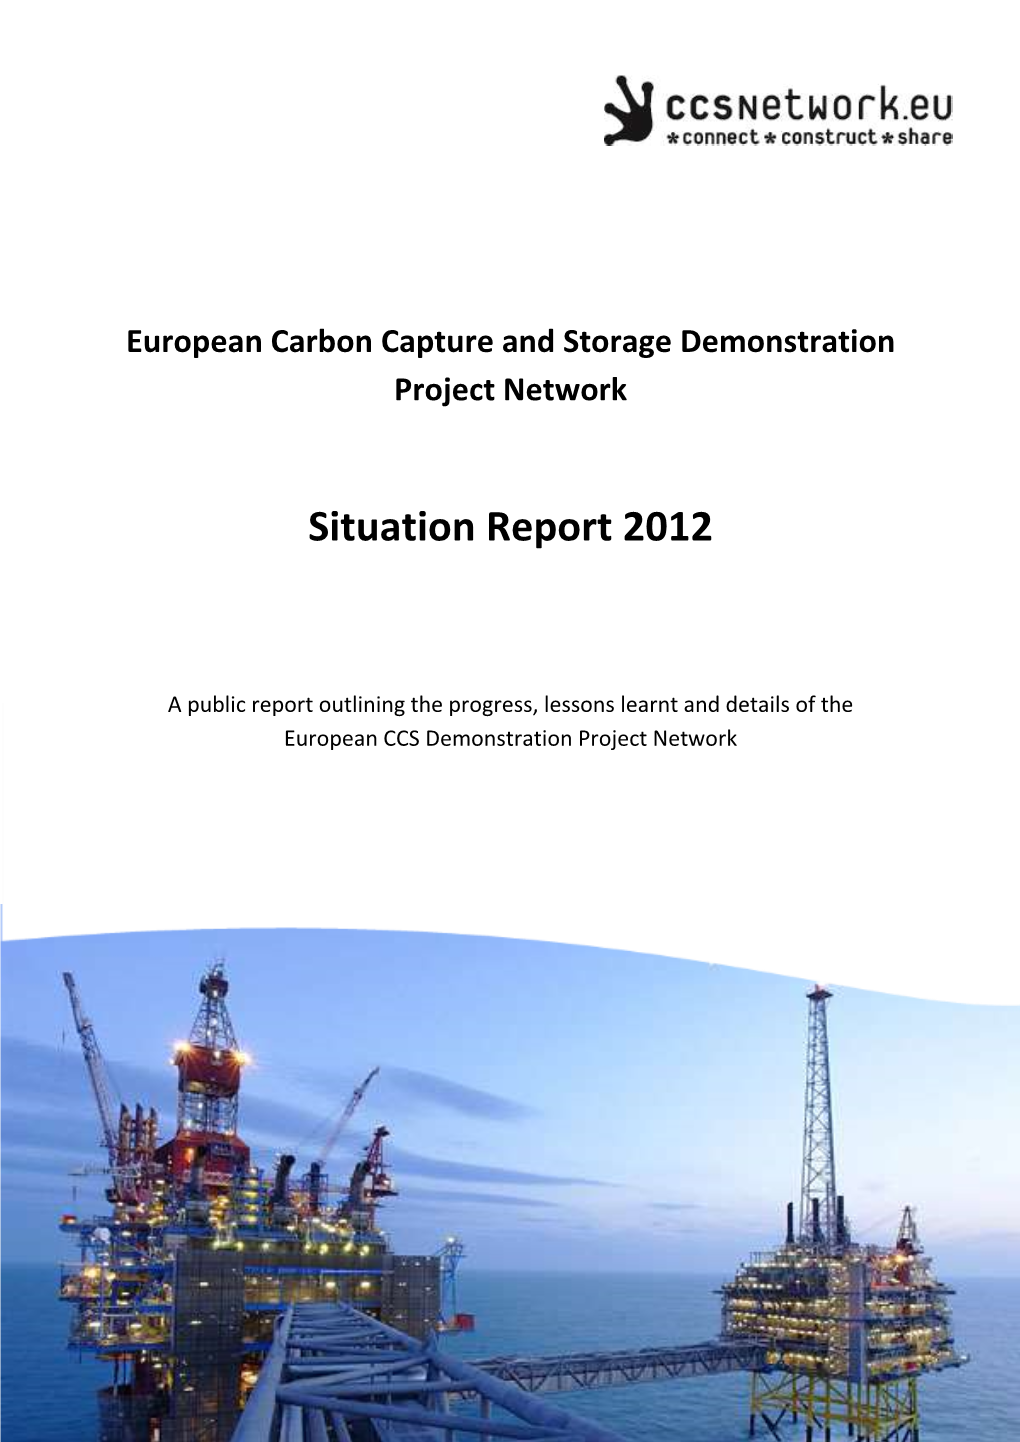 Situation Report 2012: a Public Report Outlining the Progress, Lessons